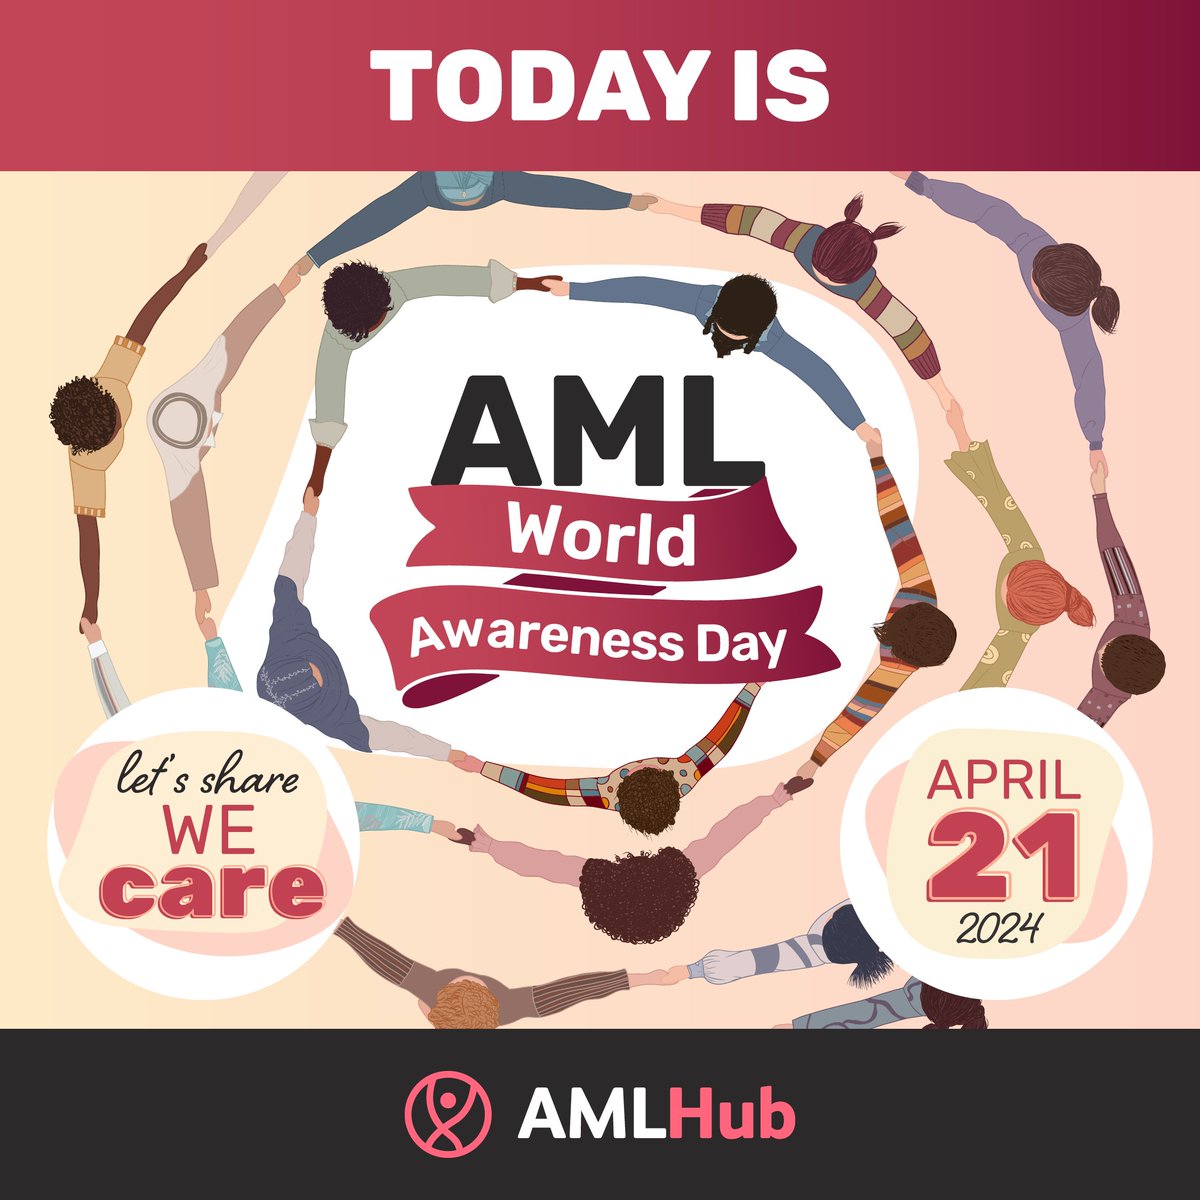 The AML Hub is proud to support #AMLWorldAwarenessDay! AML World Awareness Day is an important opportunity to unite and raise awareness of AML! 🌏 To learn more, visit: loom.ly/AkyDt8s #KnowAML